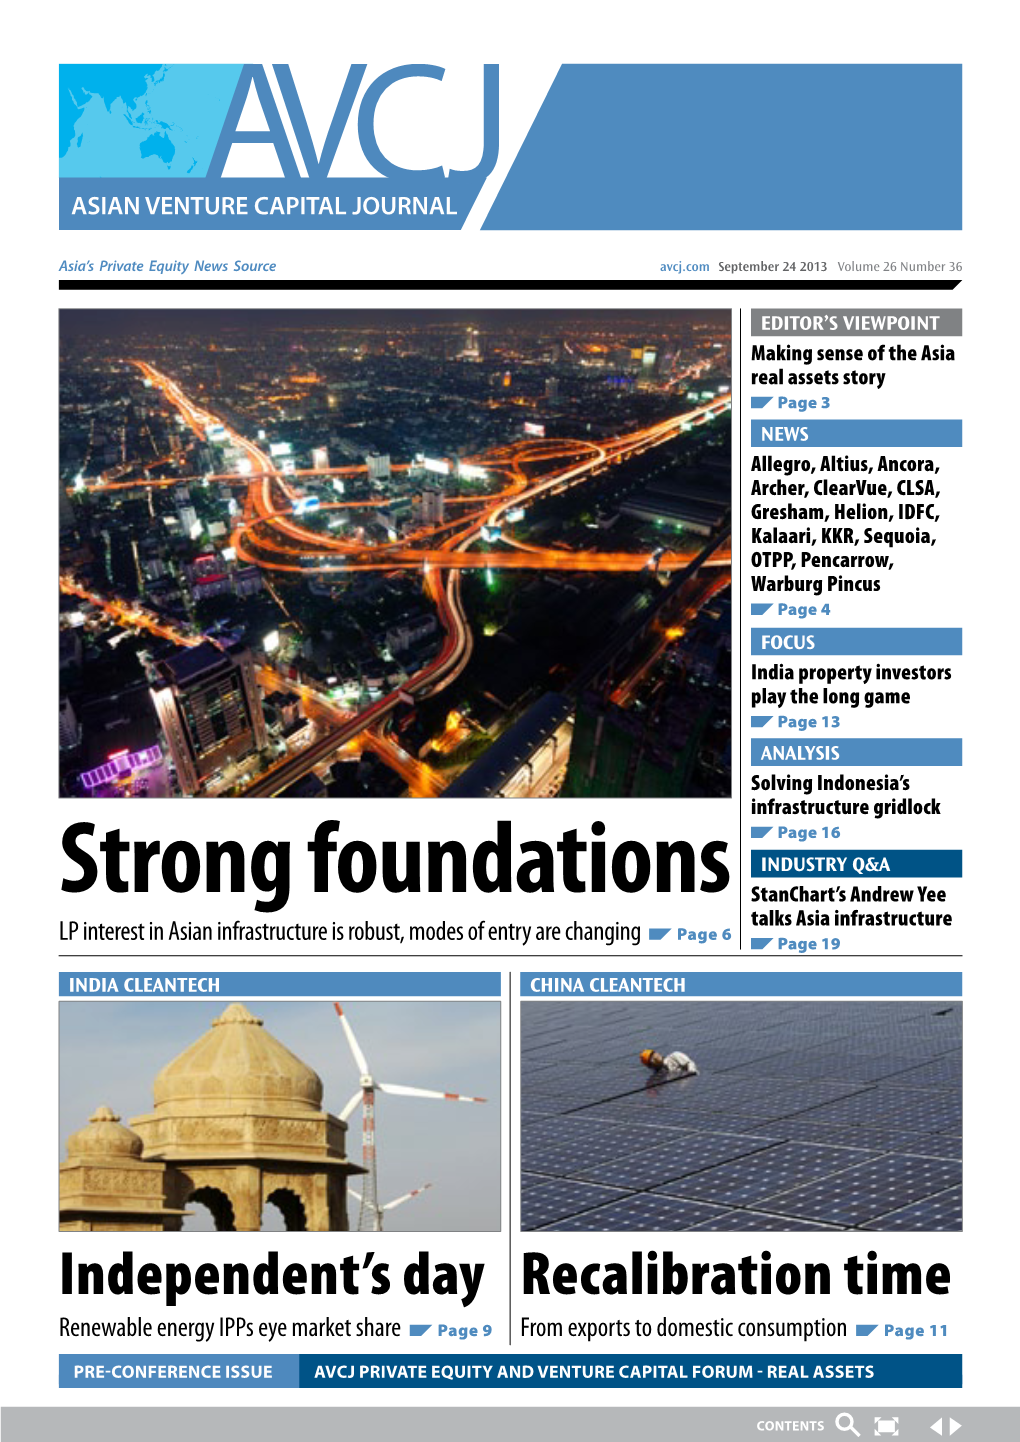 Strong Foundations Stanchart’S Andrew Yee Talks Asia Infrastructure Page 6 LP Interest in Asian Infrastructure Is Robust, Modes of Entry Are Changing Page 19